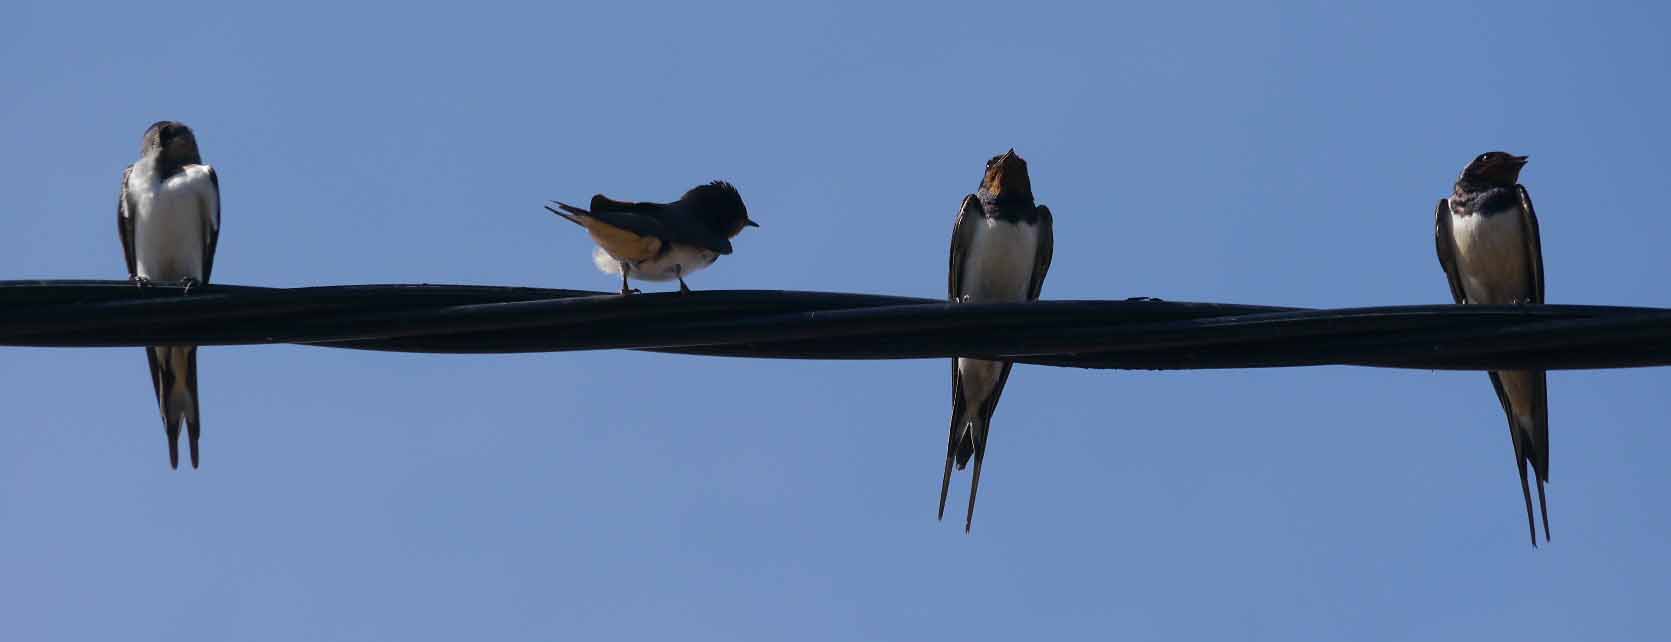 Swallows on wires, MJMcGill